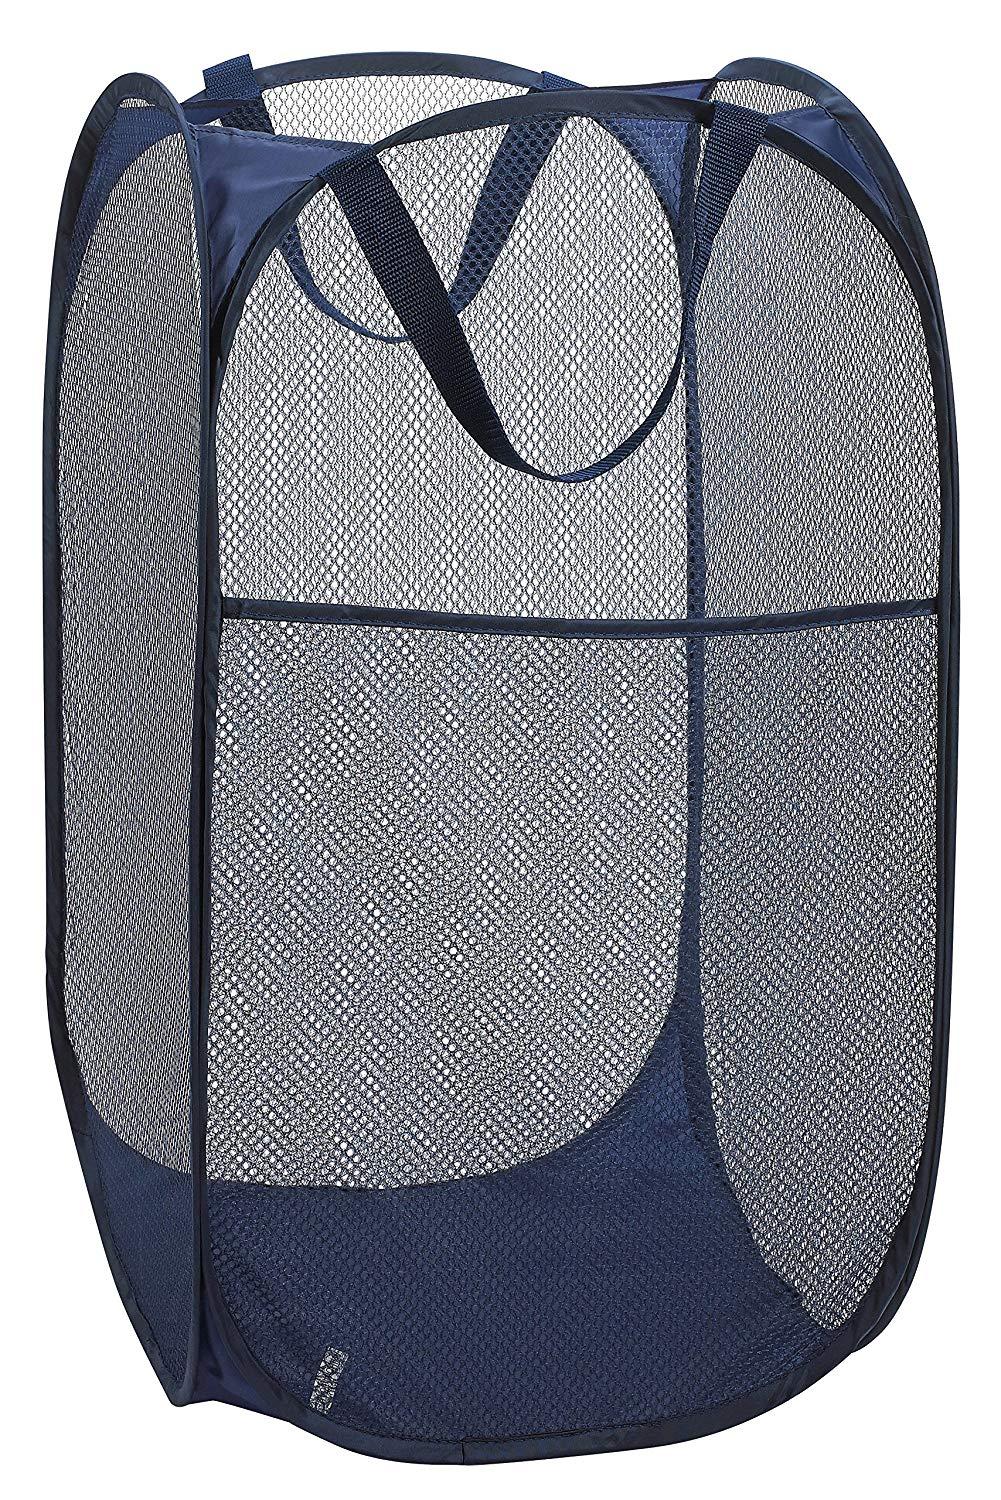 Handy Laundry Easy Carry Mesh Laundry Basket